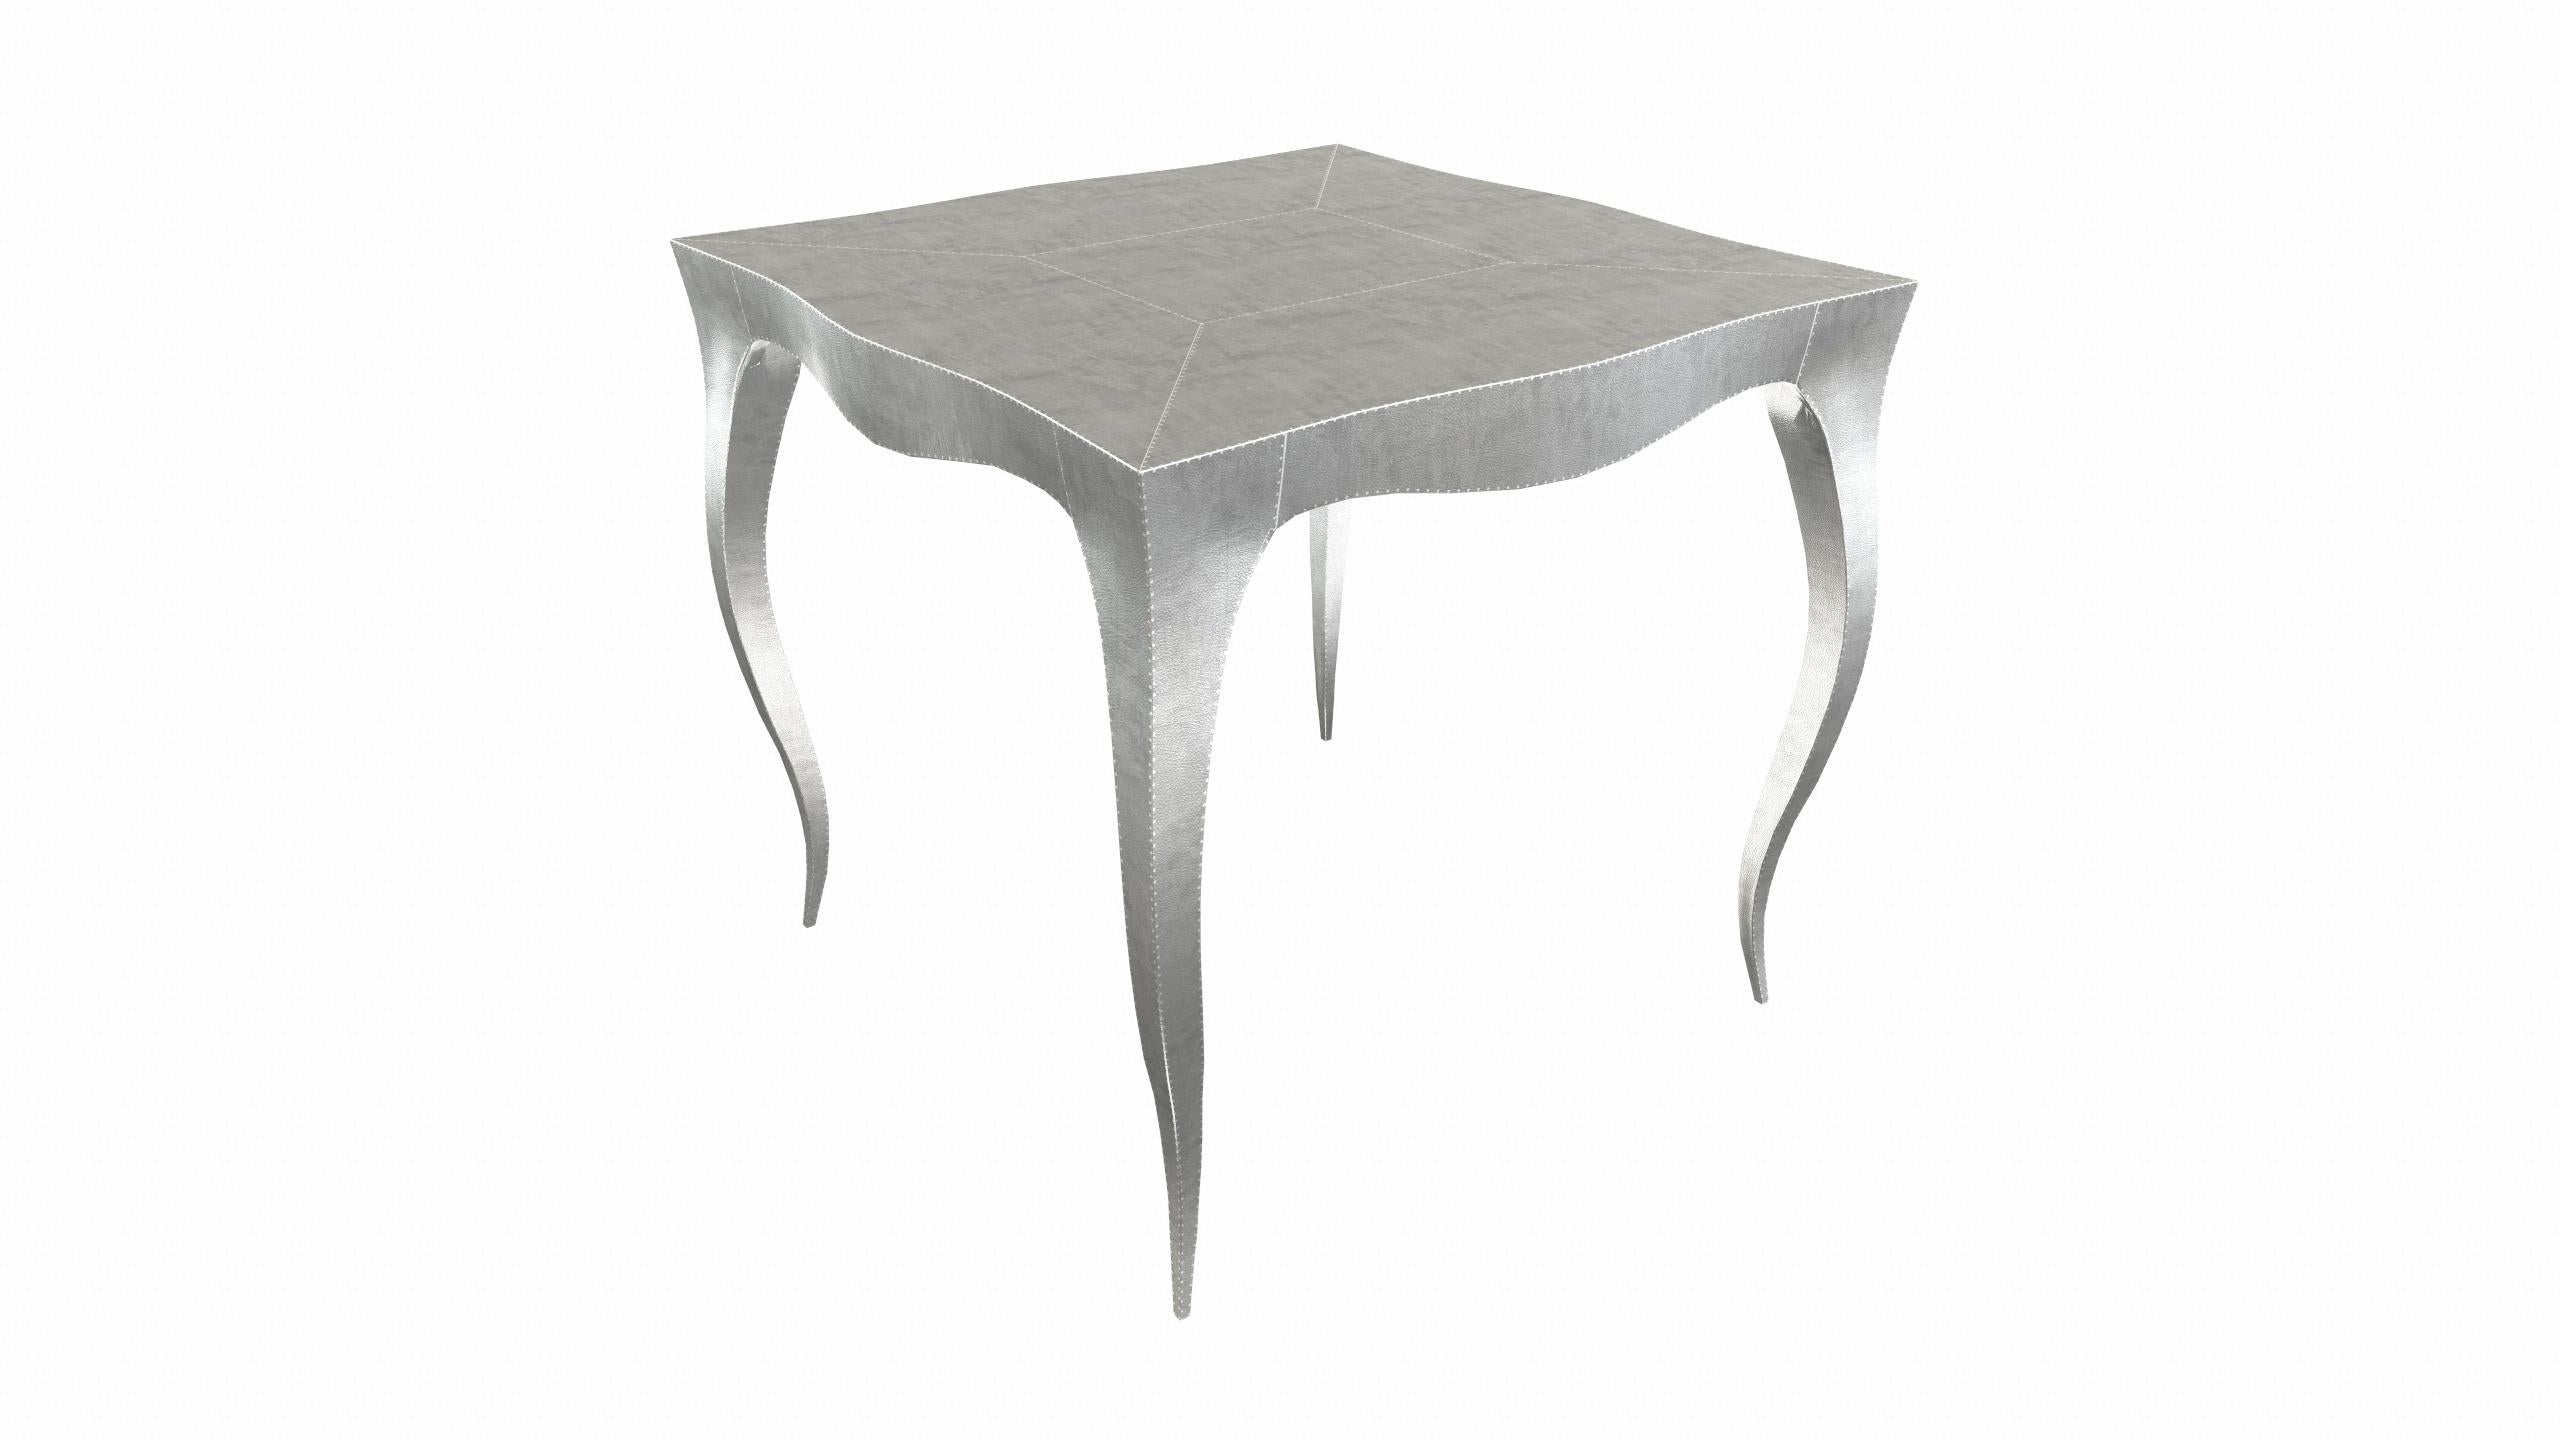 American Louise Art Deco Center Tables Fine Hammered White Bronze by Paul Mathieu For Sale